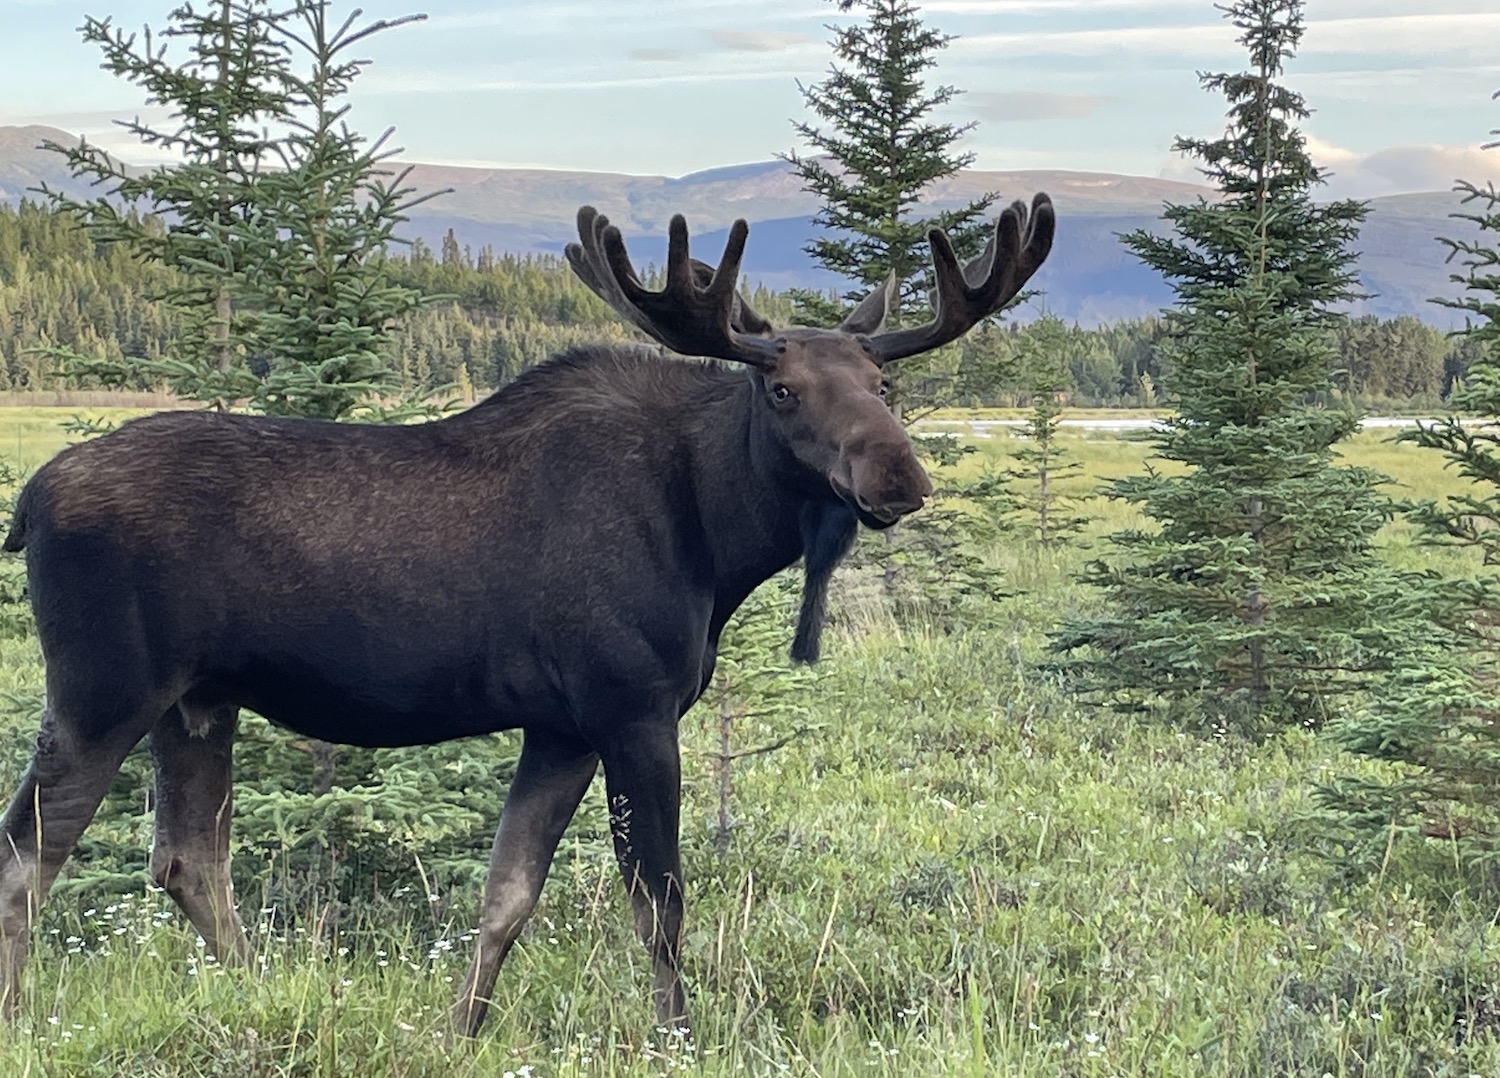 A bull moose with antlers in velvet stands in meadow studded with small spruce trees in the foreground. A forest and high hills rise in the background.